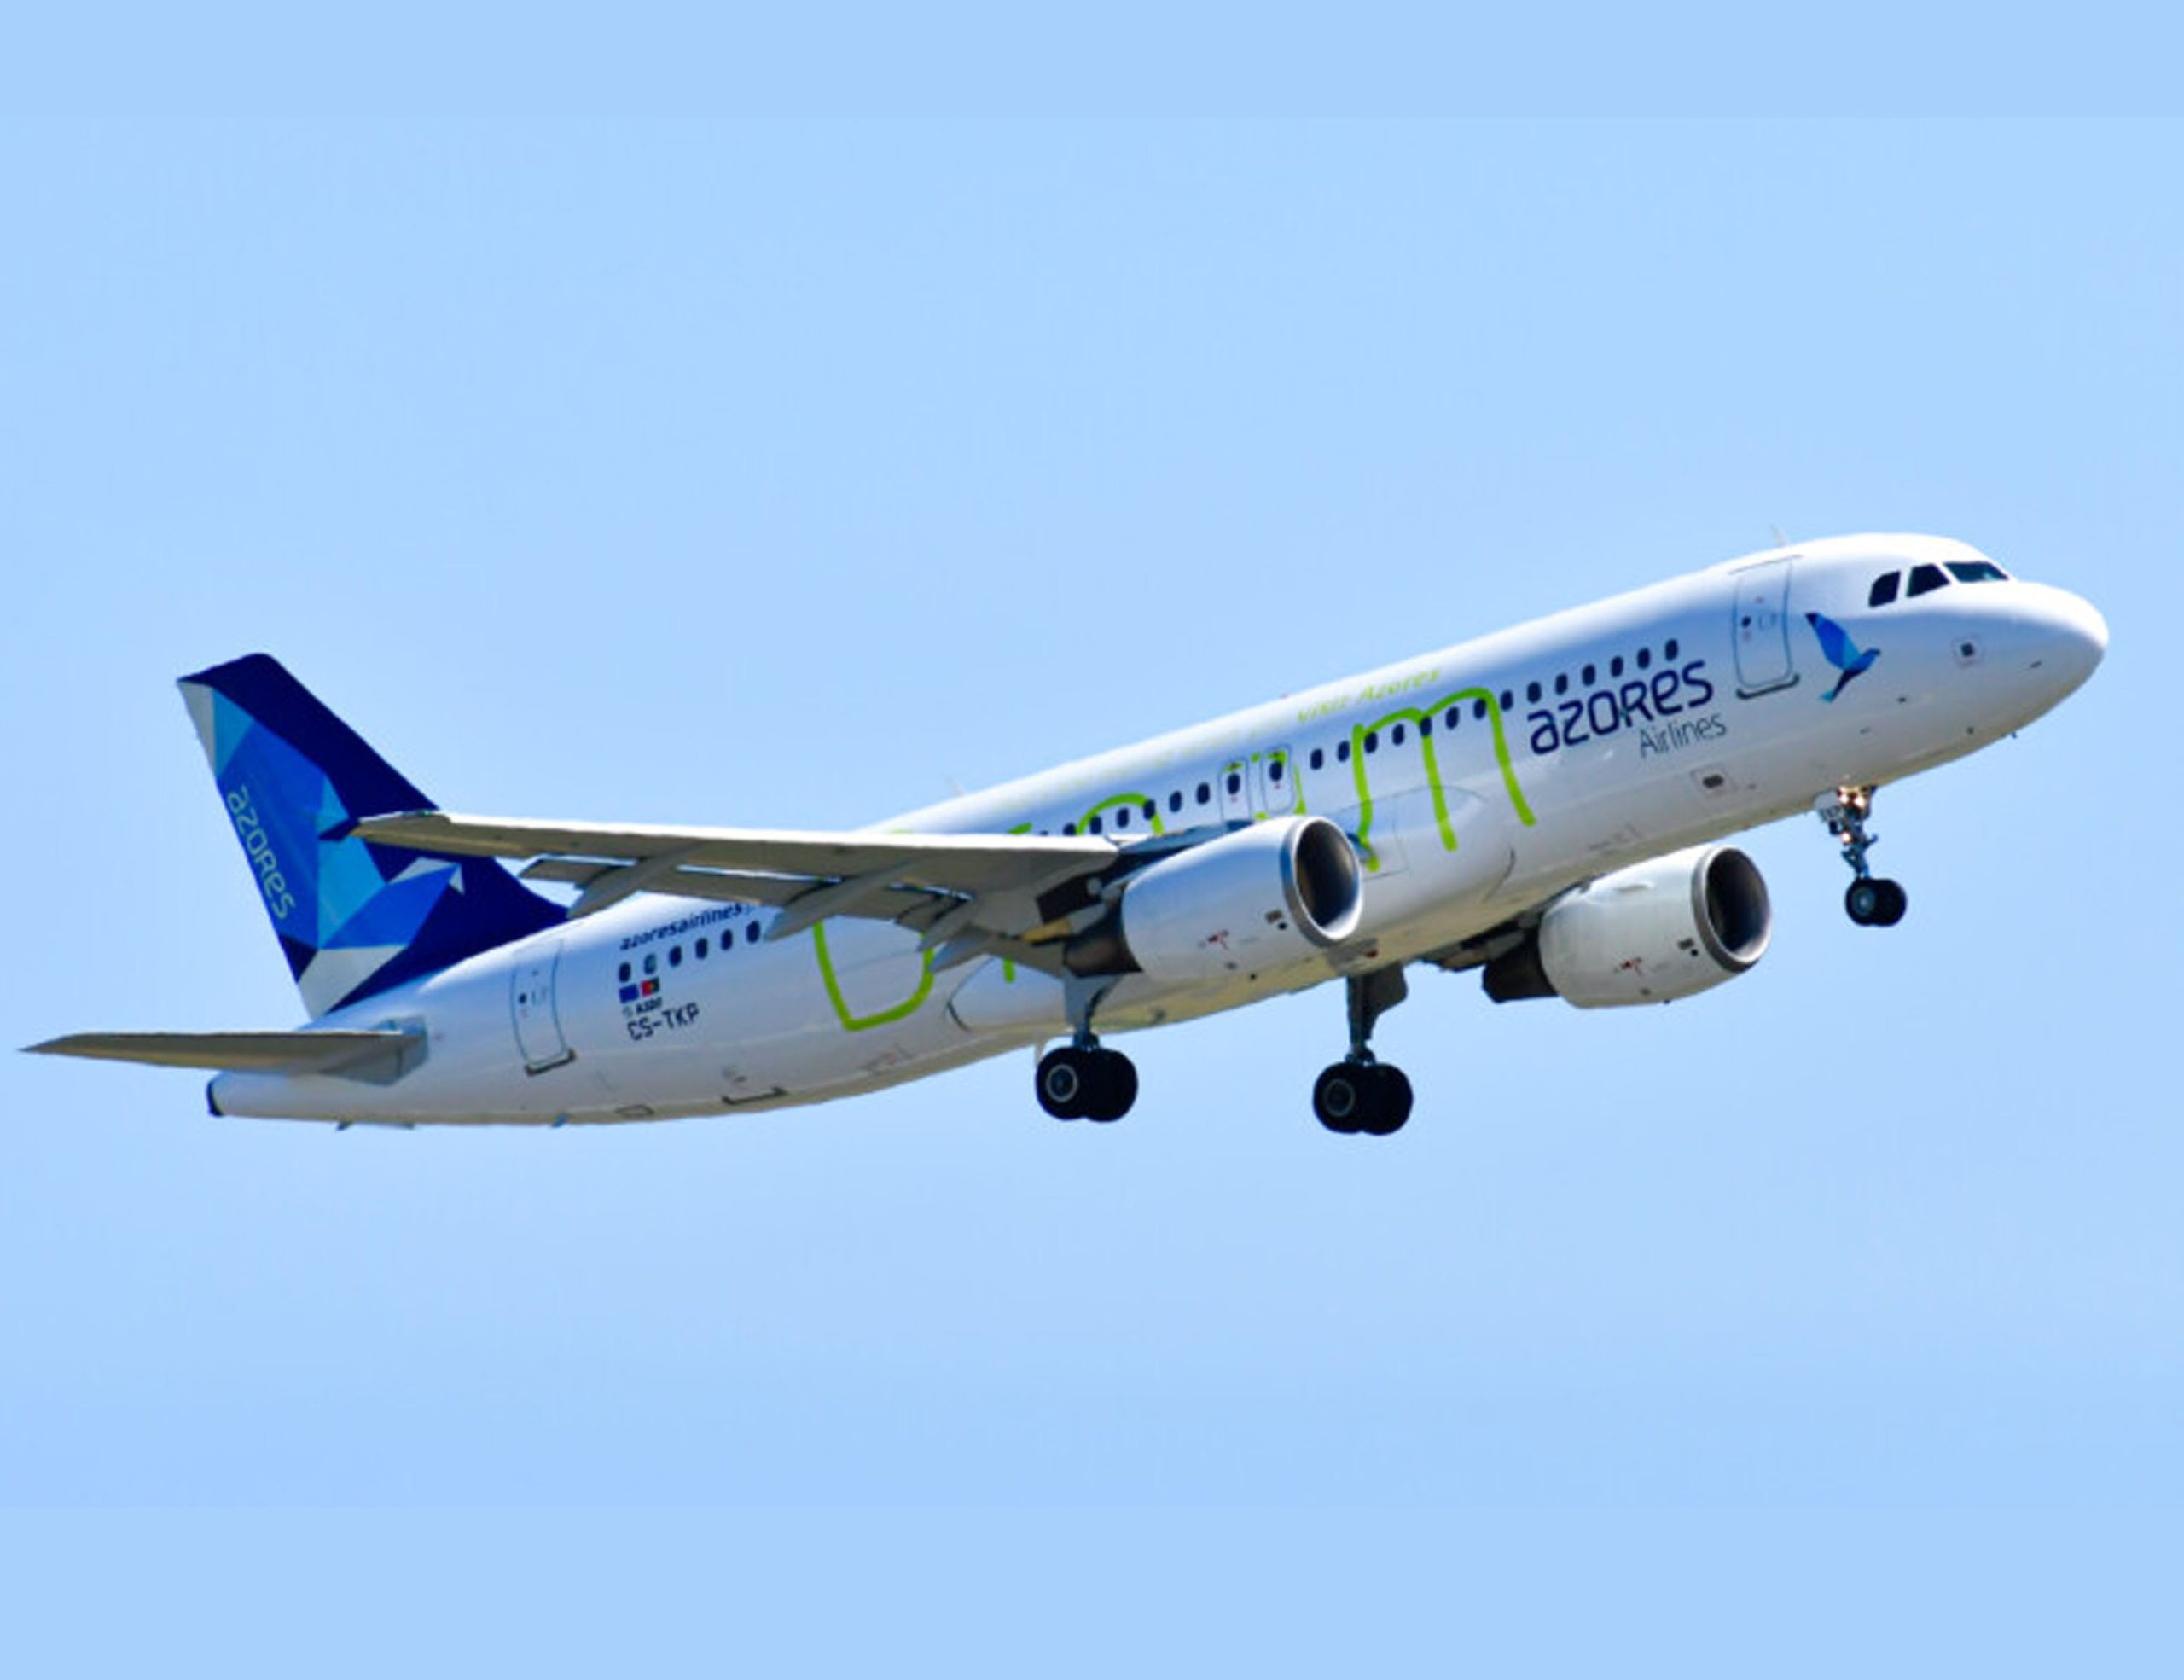 Open Jaw Quebec to Terceira on Azores Airlines